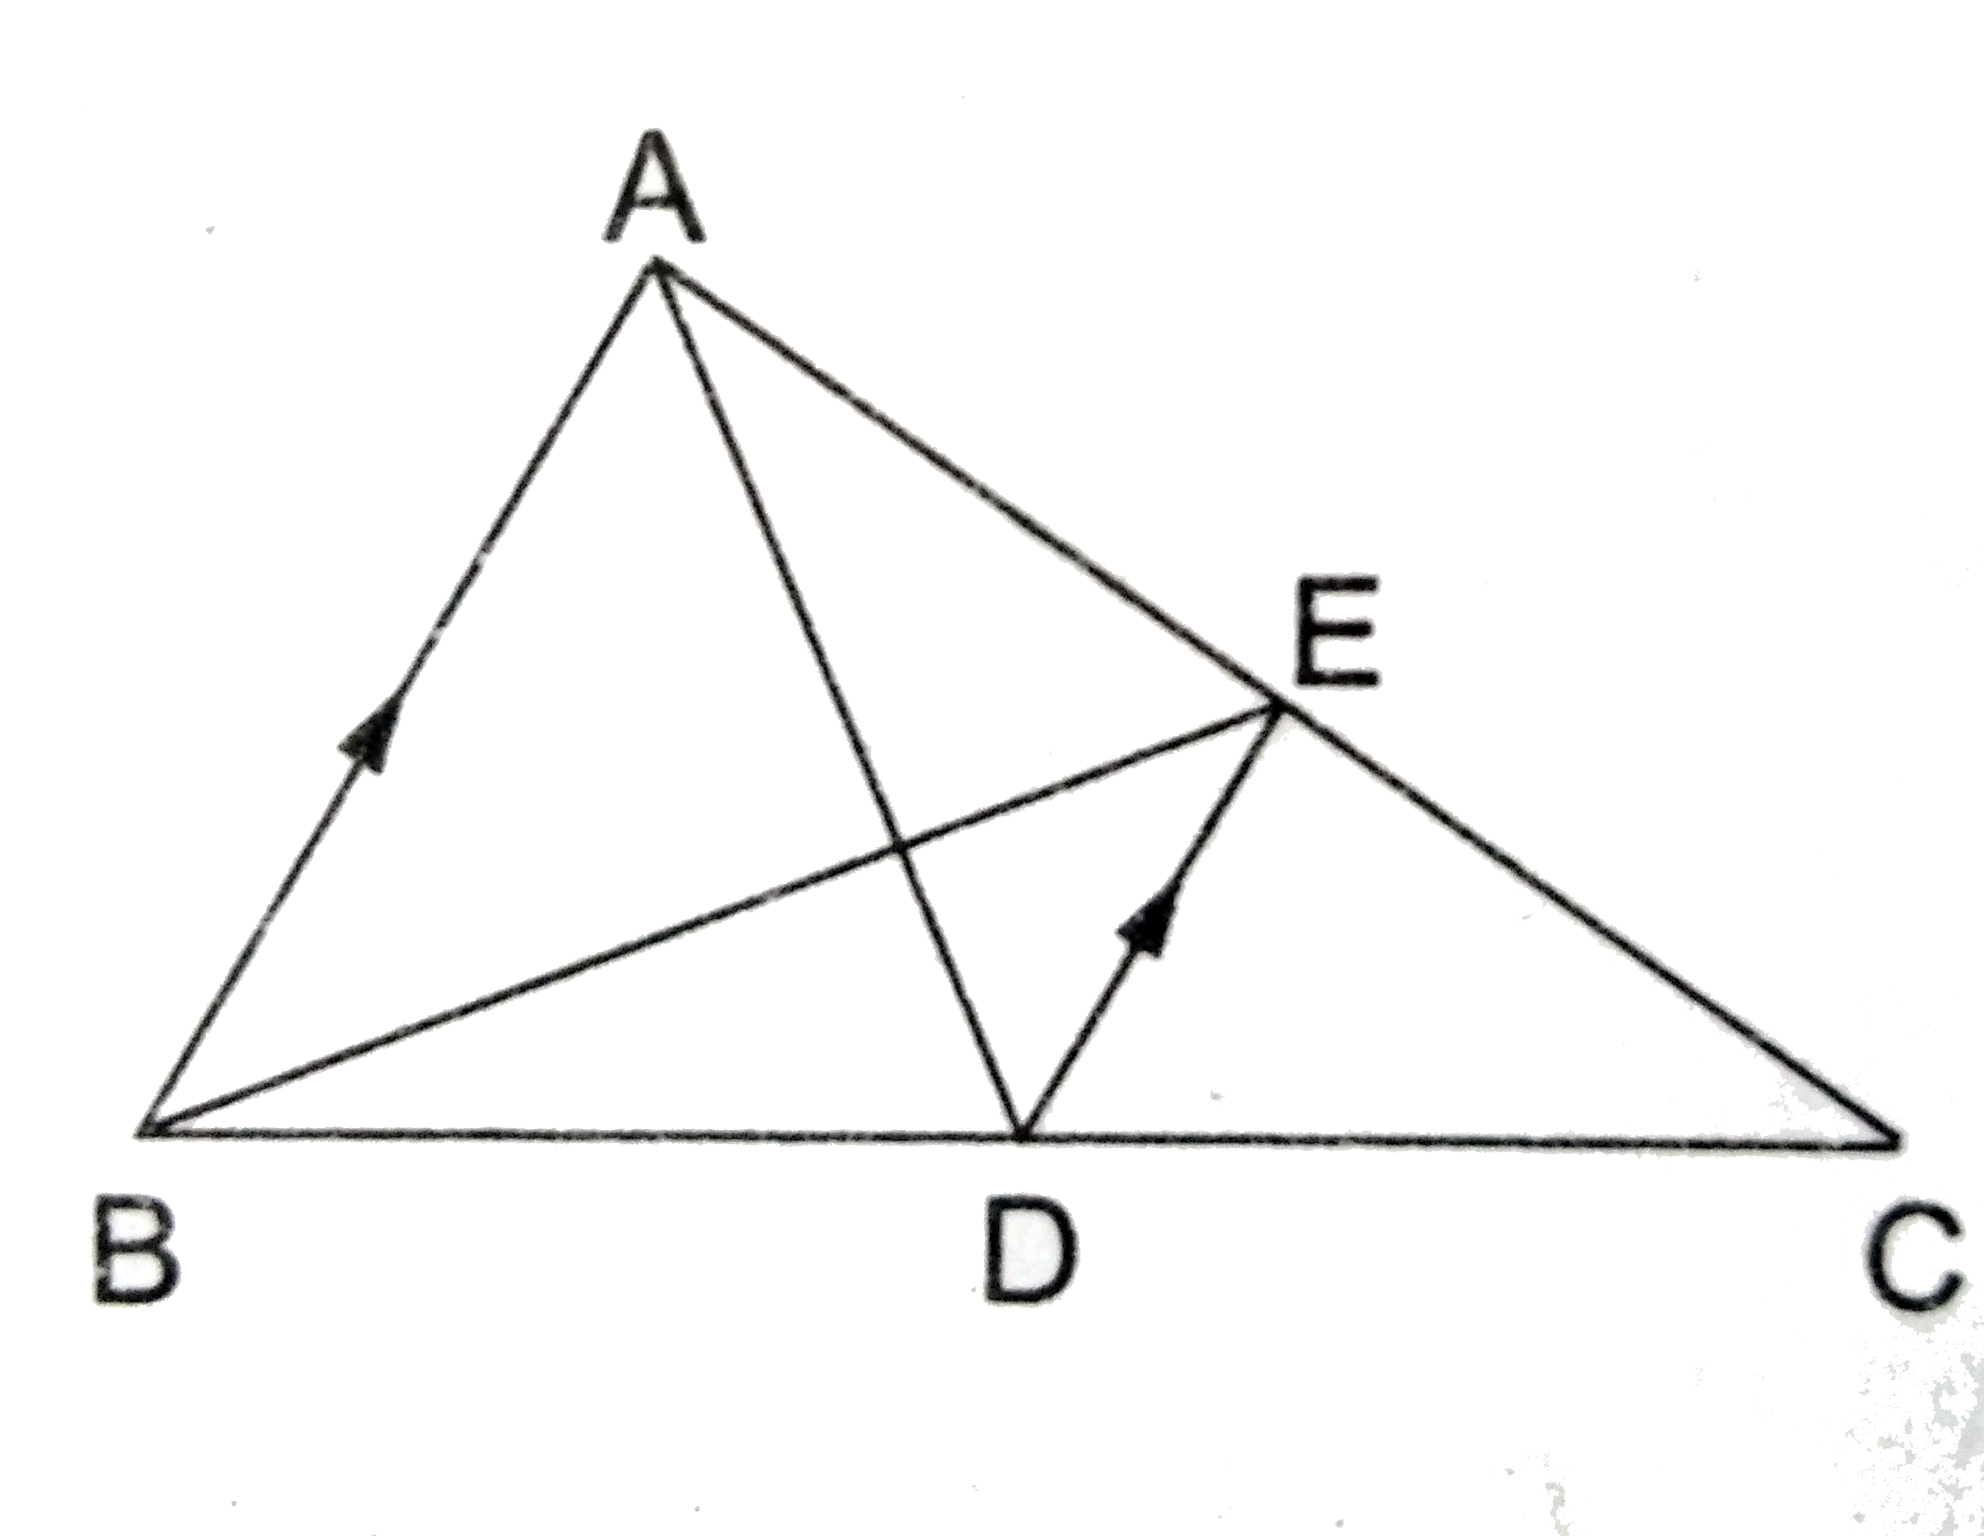 In the adjoining figure, AD is a median of triangle ABC and DE||BA. Show that BE is also a median of triangle ABC.